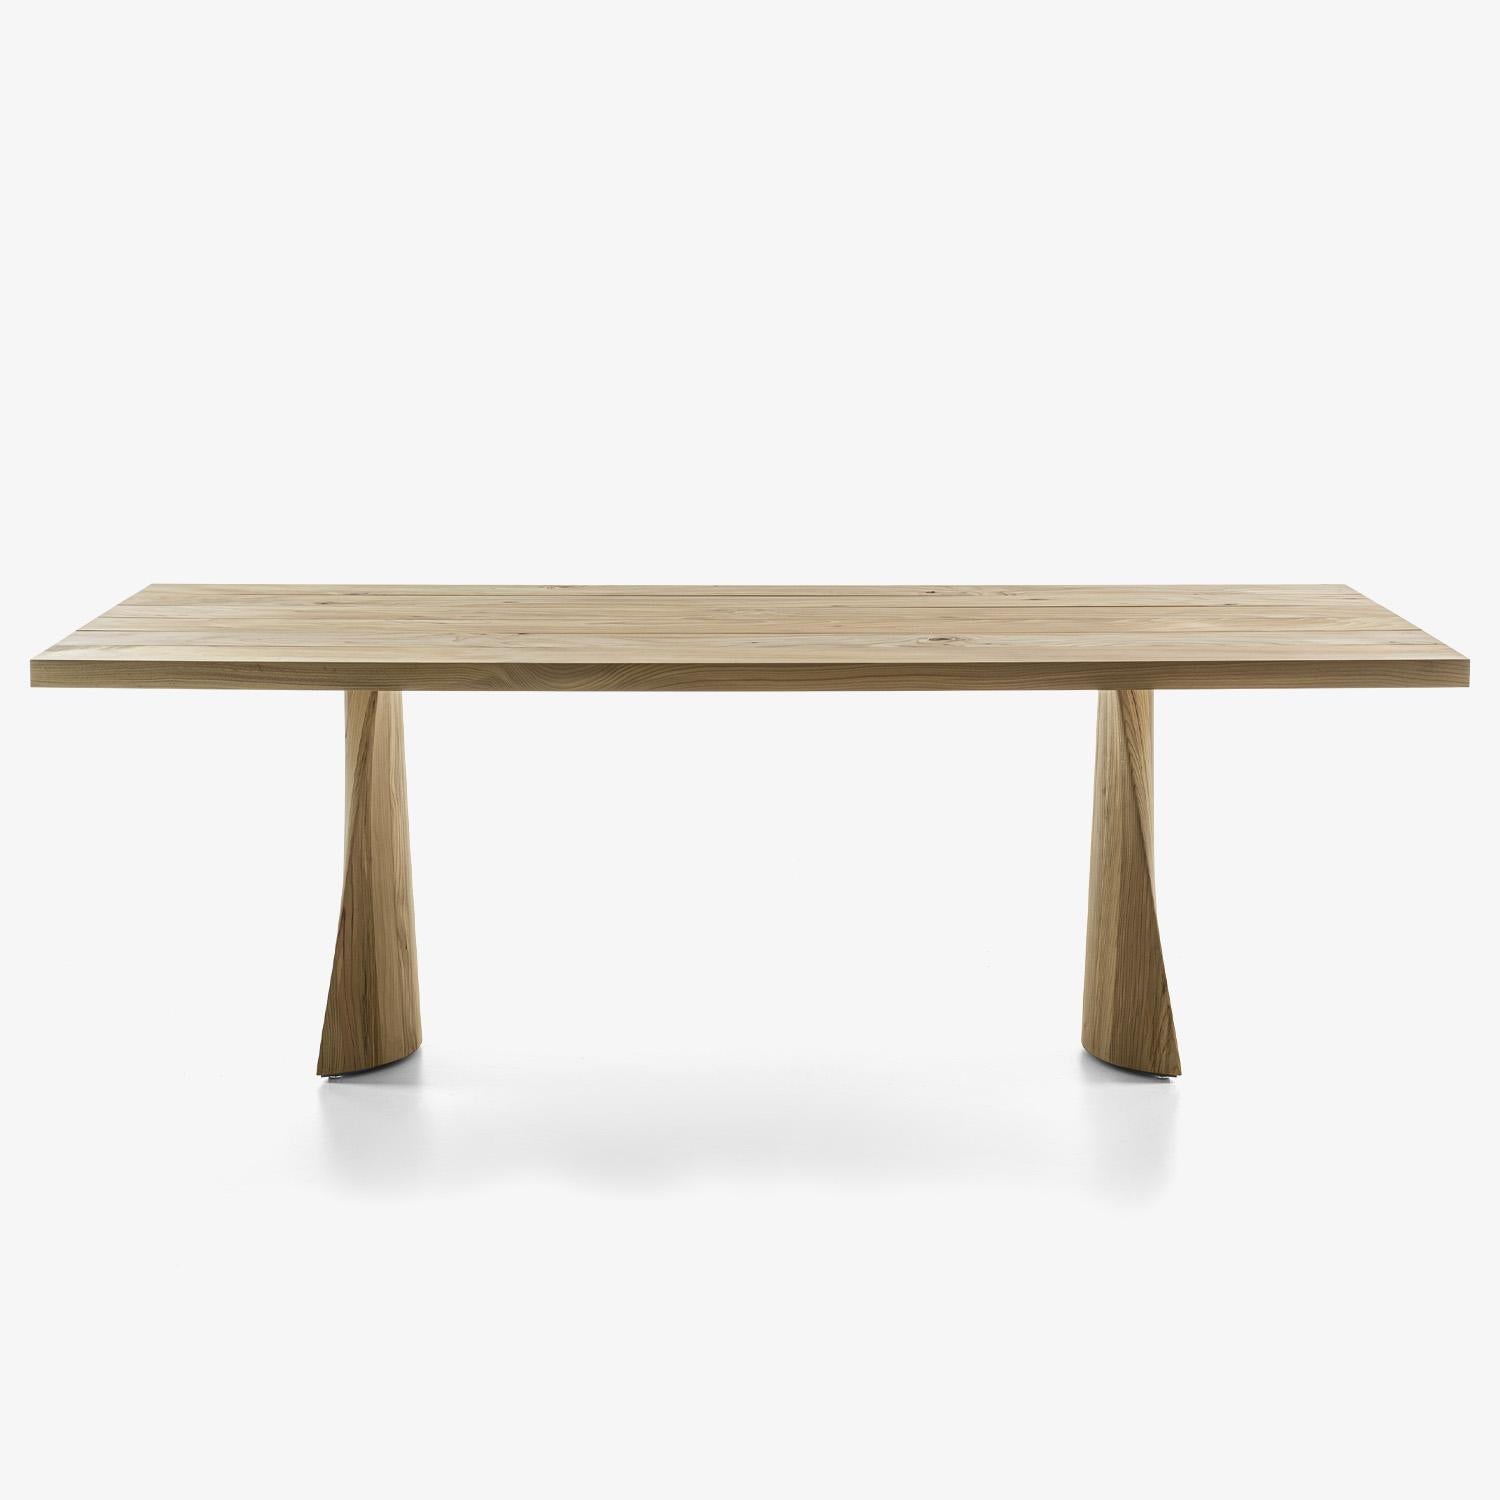 Contemporary Simple Swing Cedar Outdoor Table, Designed by Studio Excalibur, Made in Italy For Sale